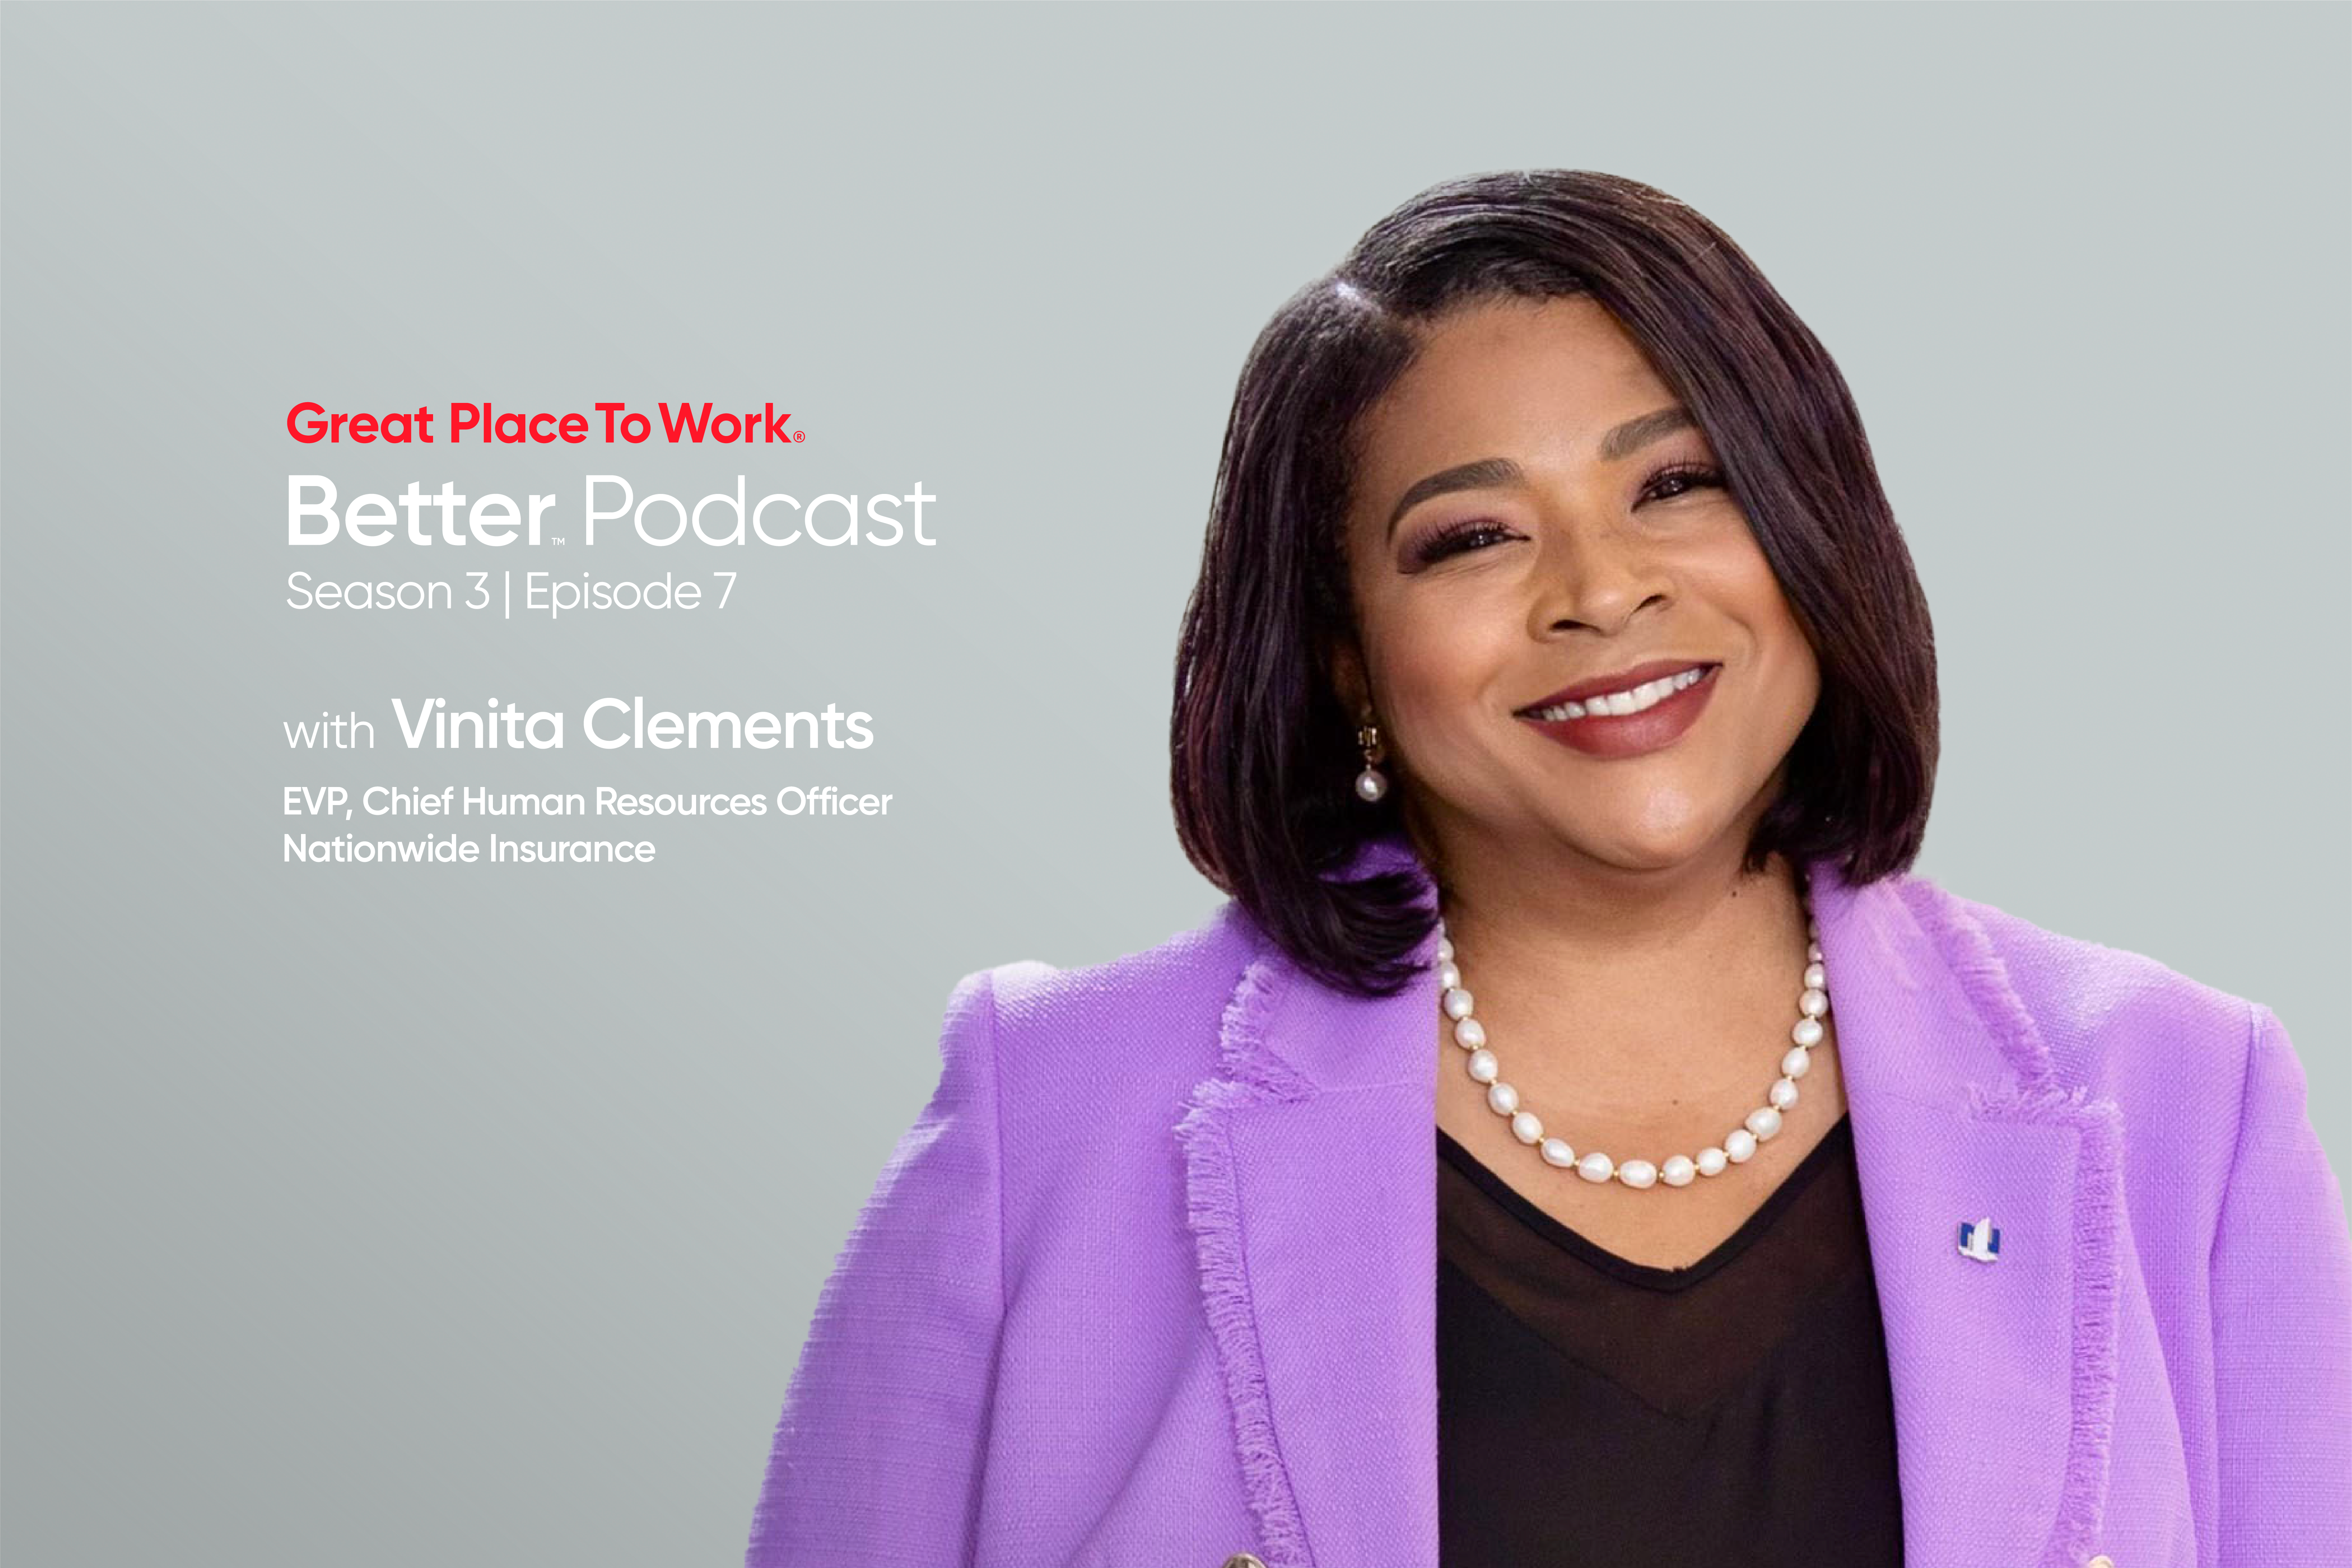  Vinita Clements on the Importance of Belonging at Work